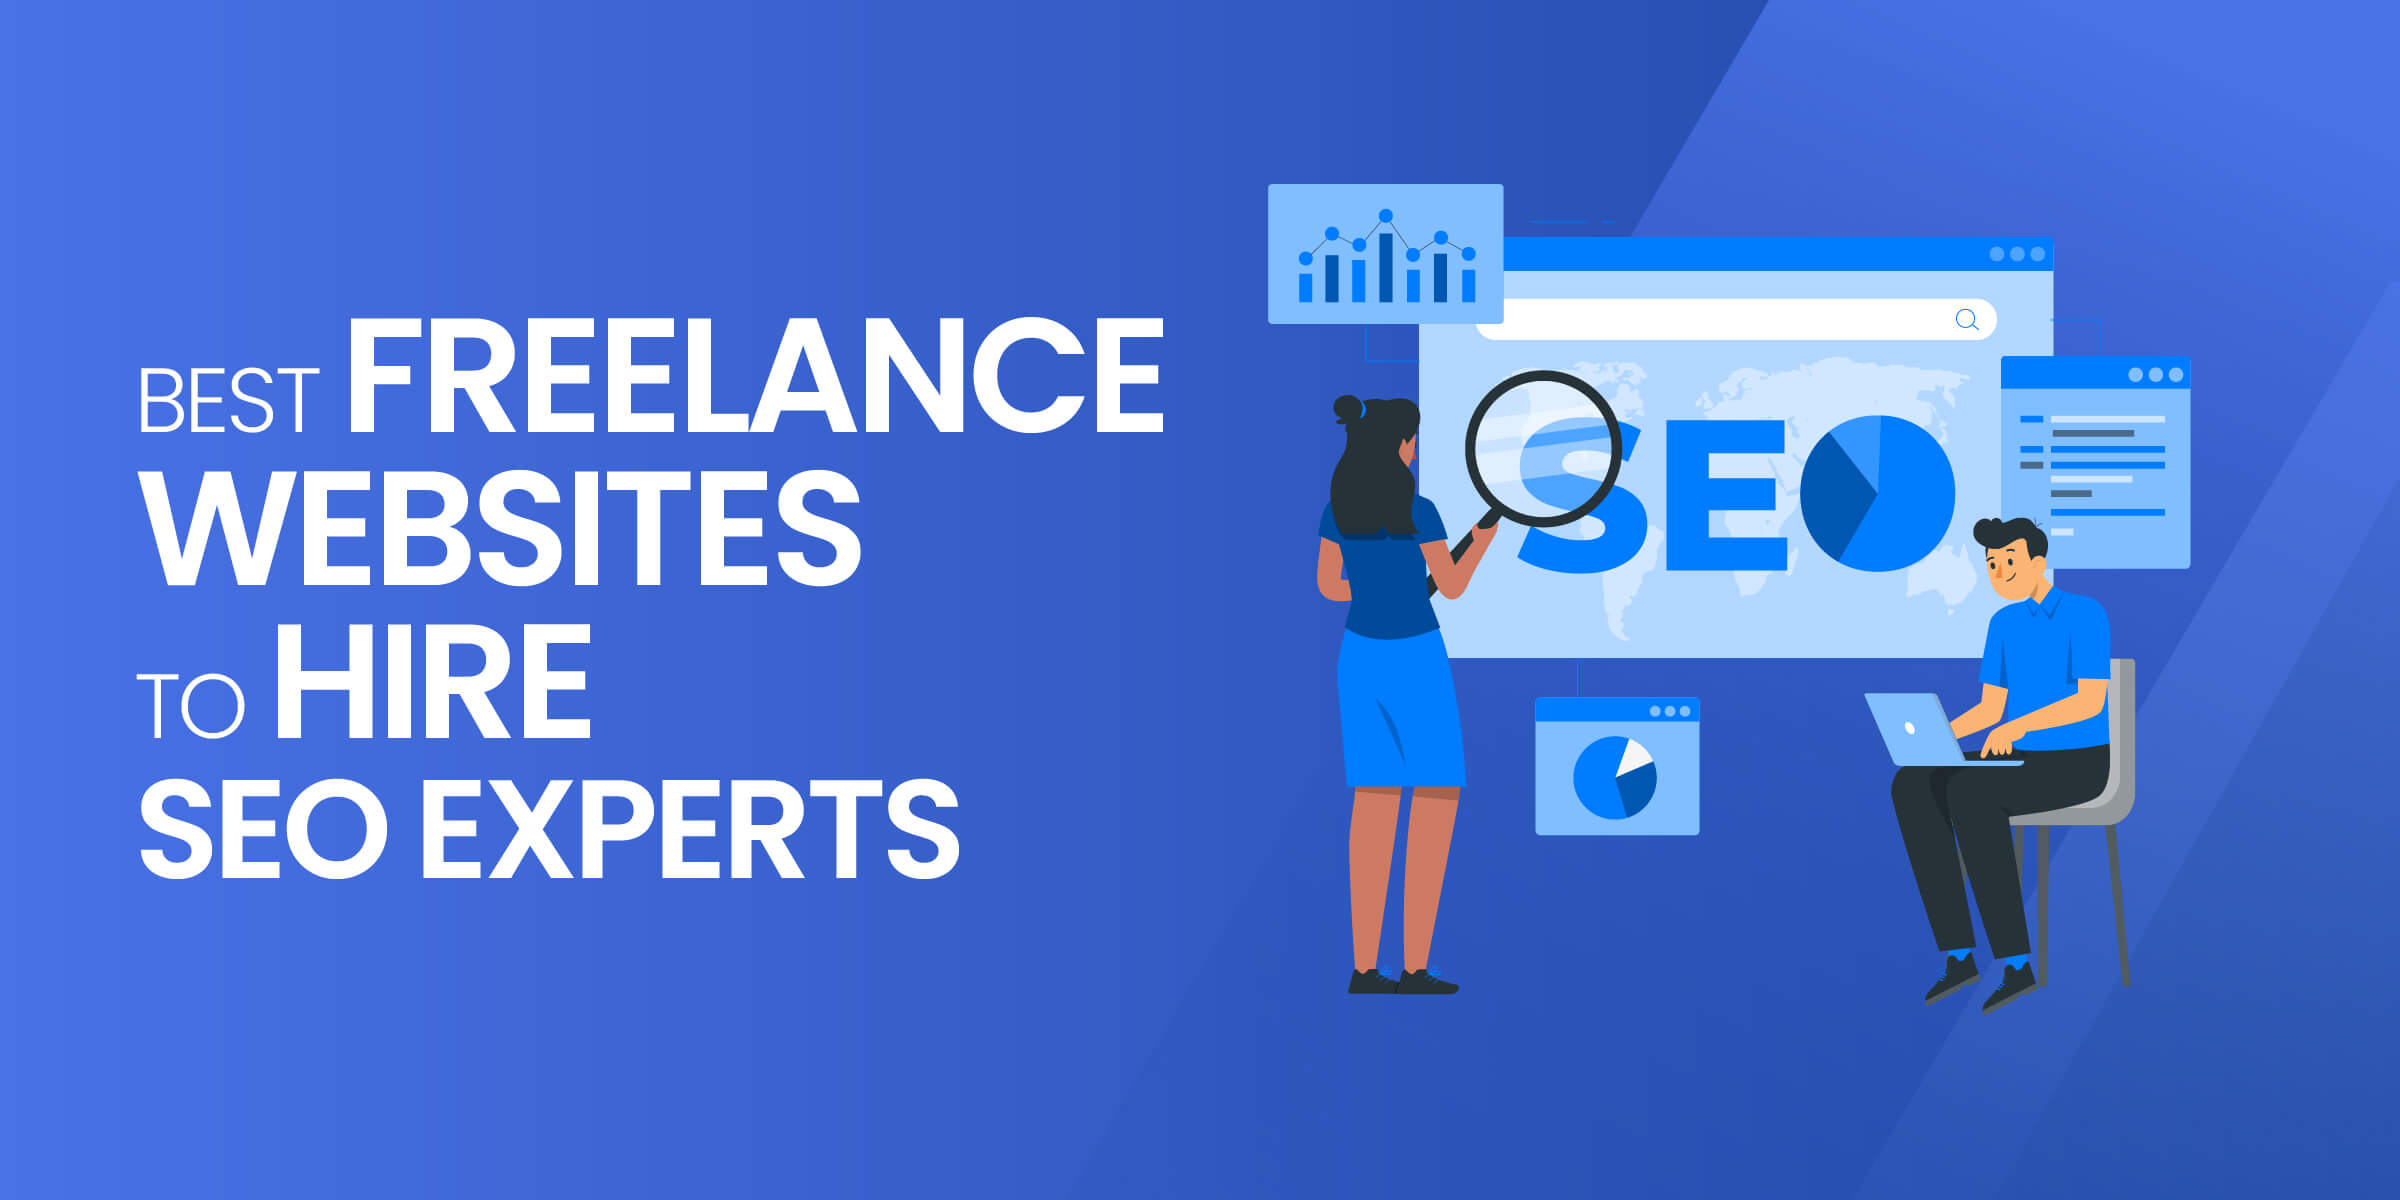 Best Freelance Websites to Hire SEO Experts